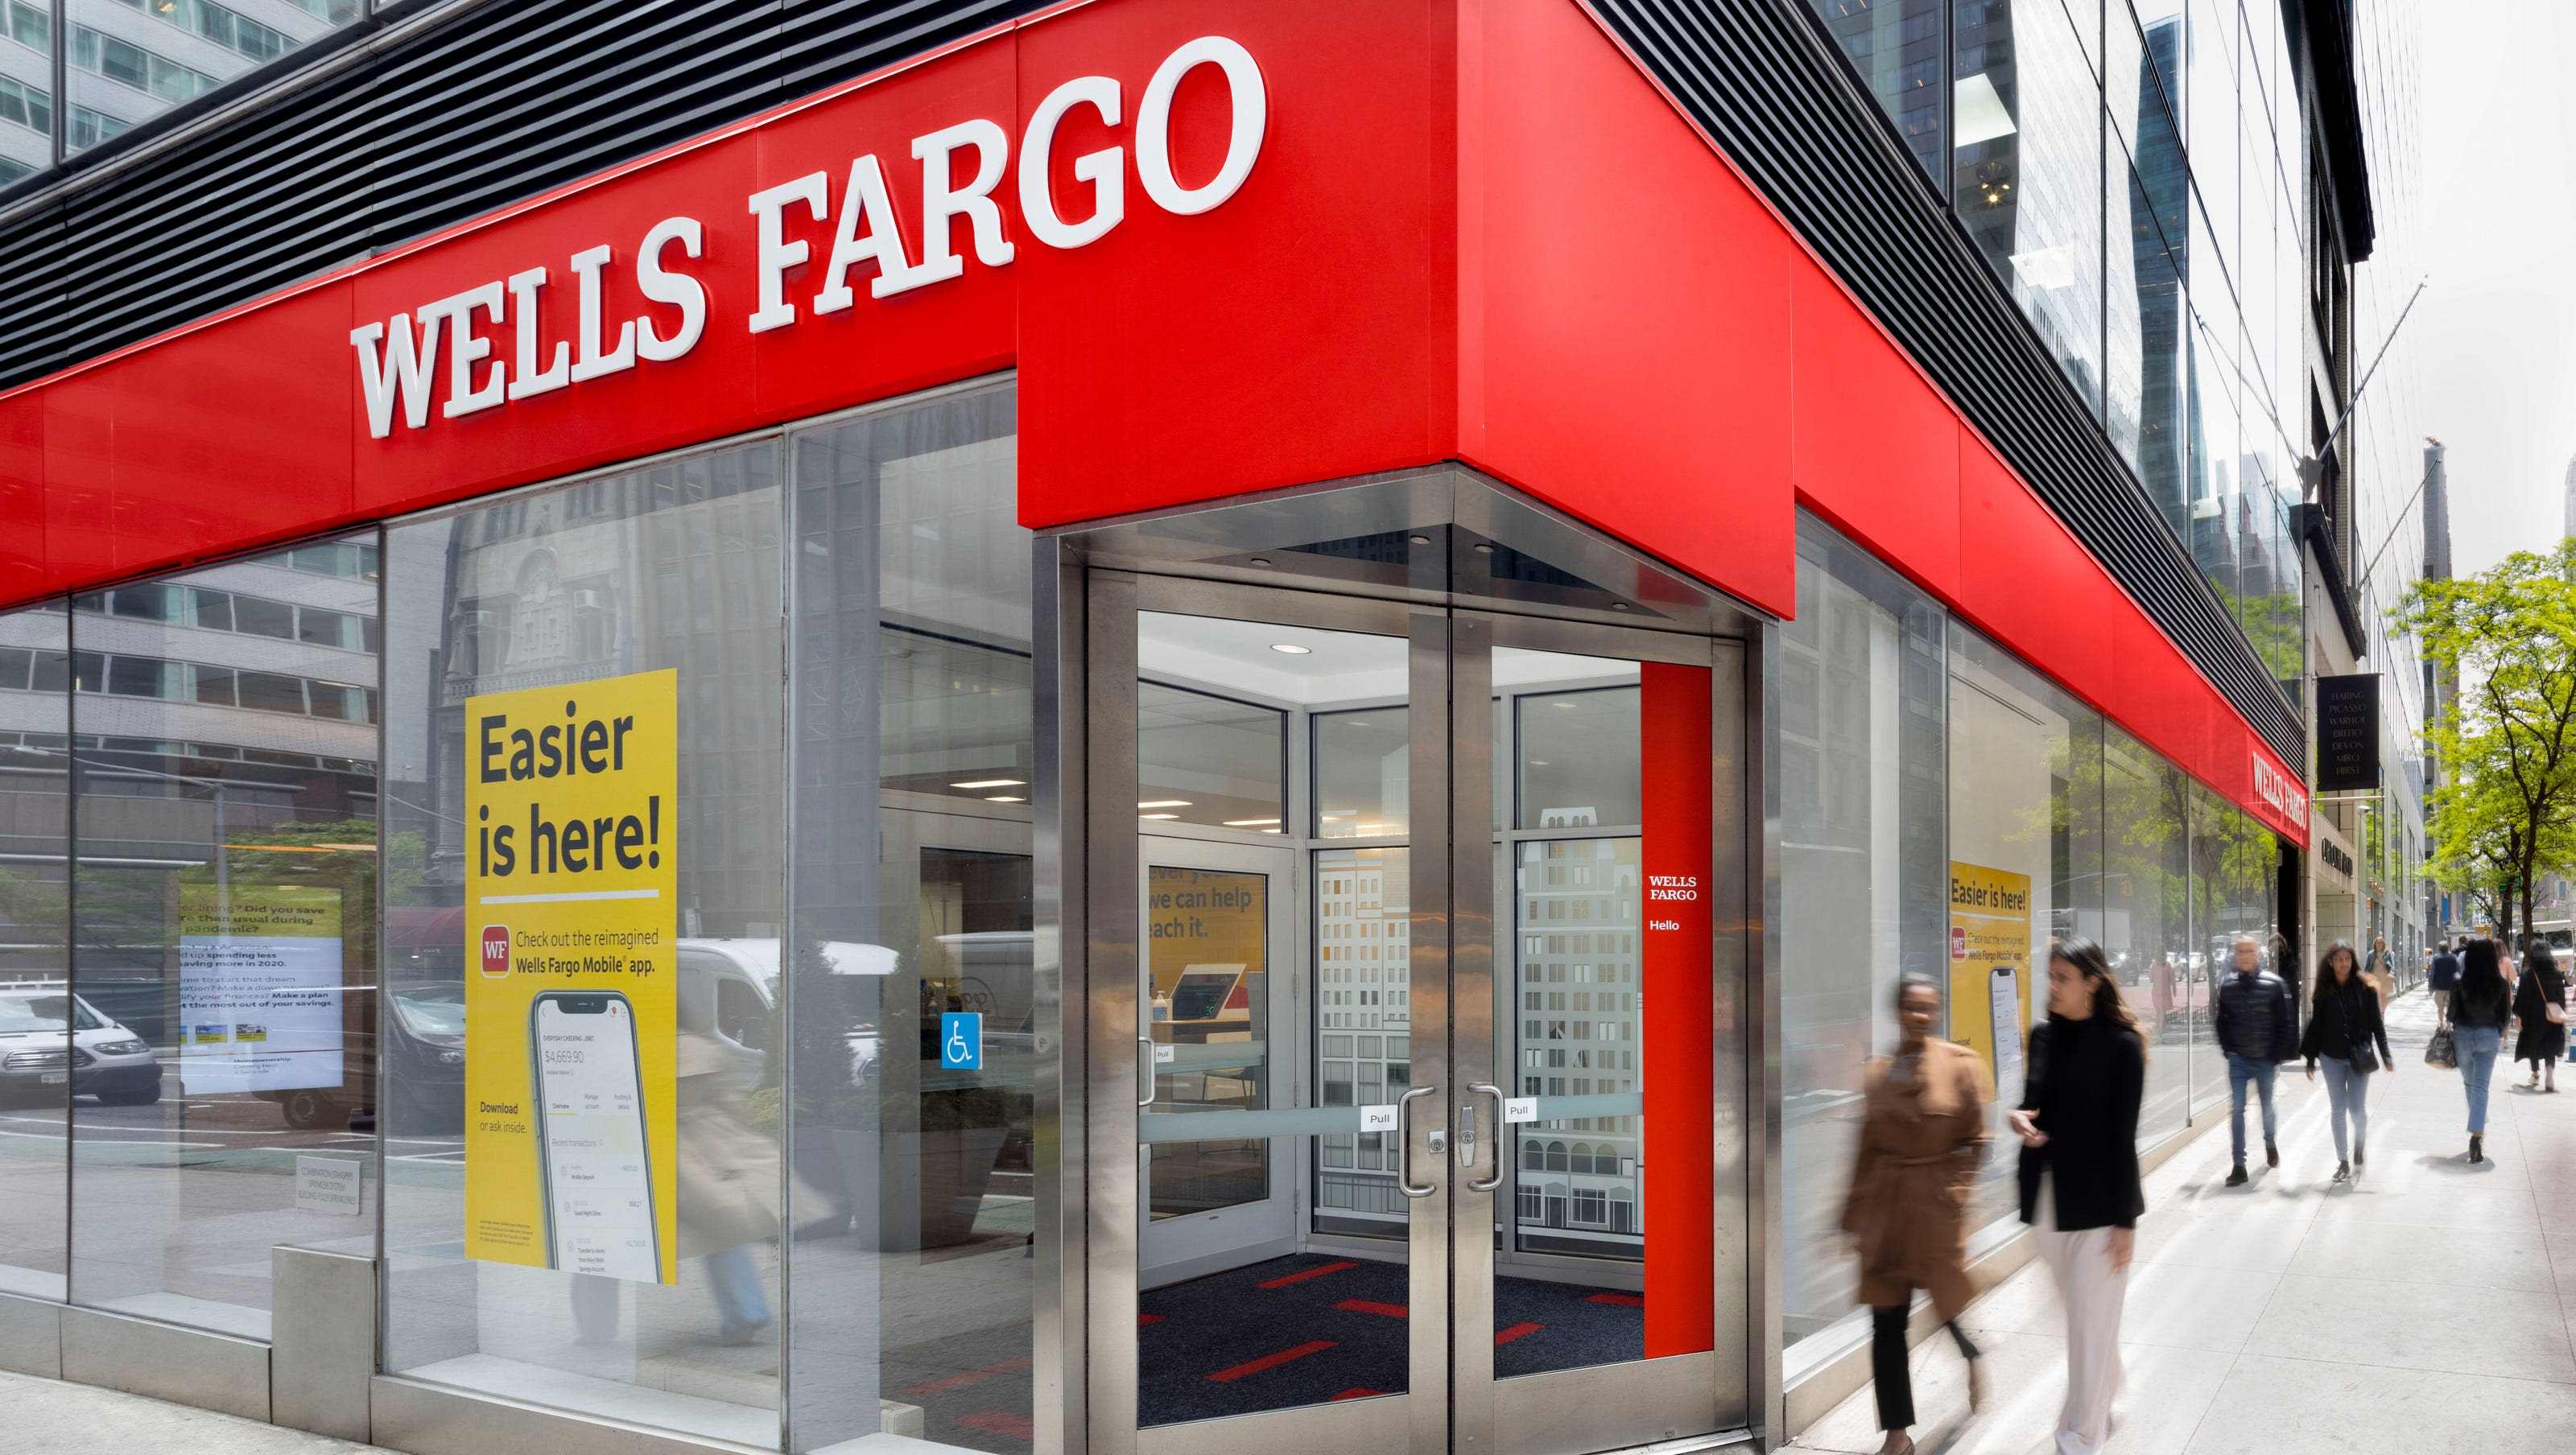 Wells Fargo rolled out a new credit card you can use to pay rent. Is it a money-loser?